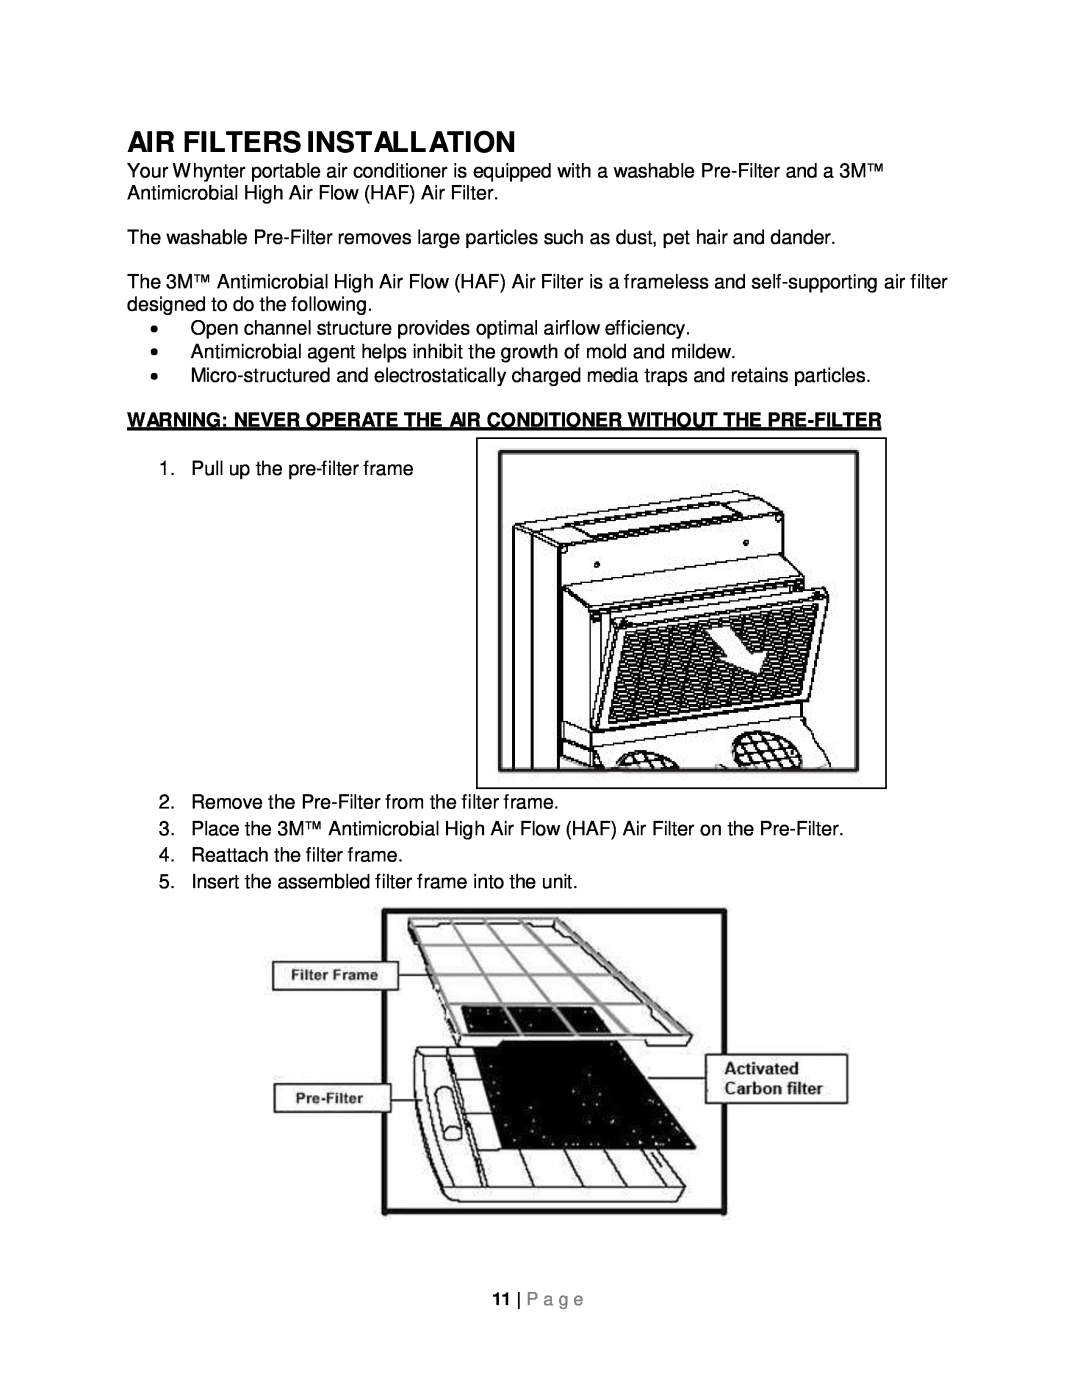 Whynter ARC-143MX instruction manual Air Filters Installation 